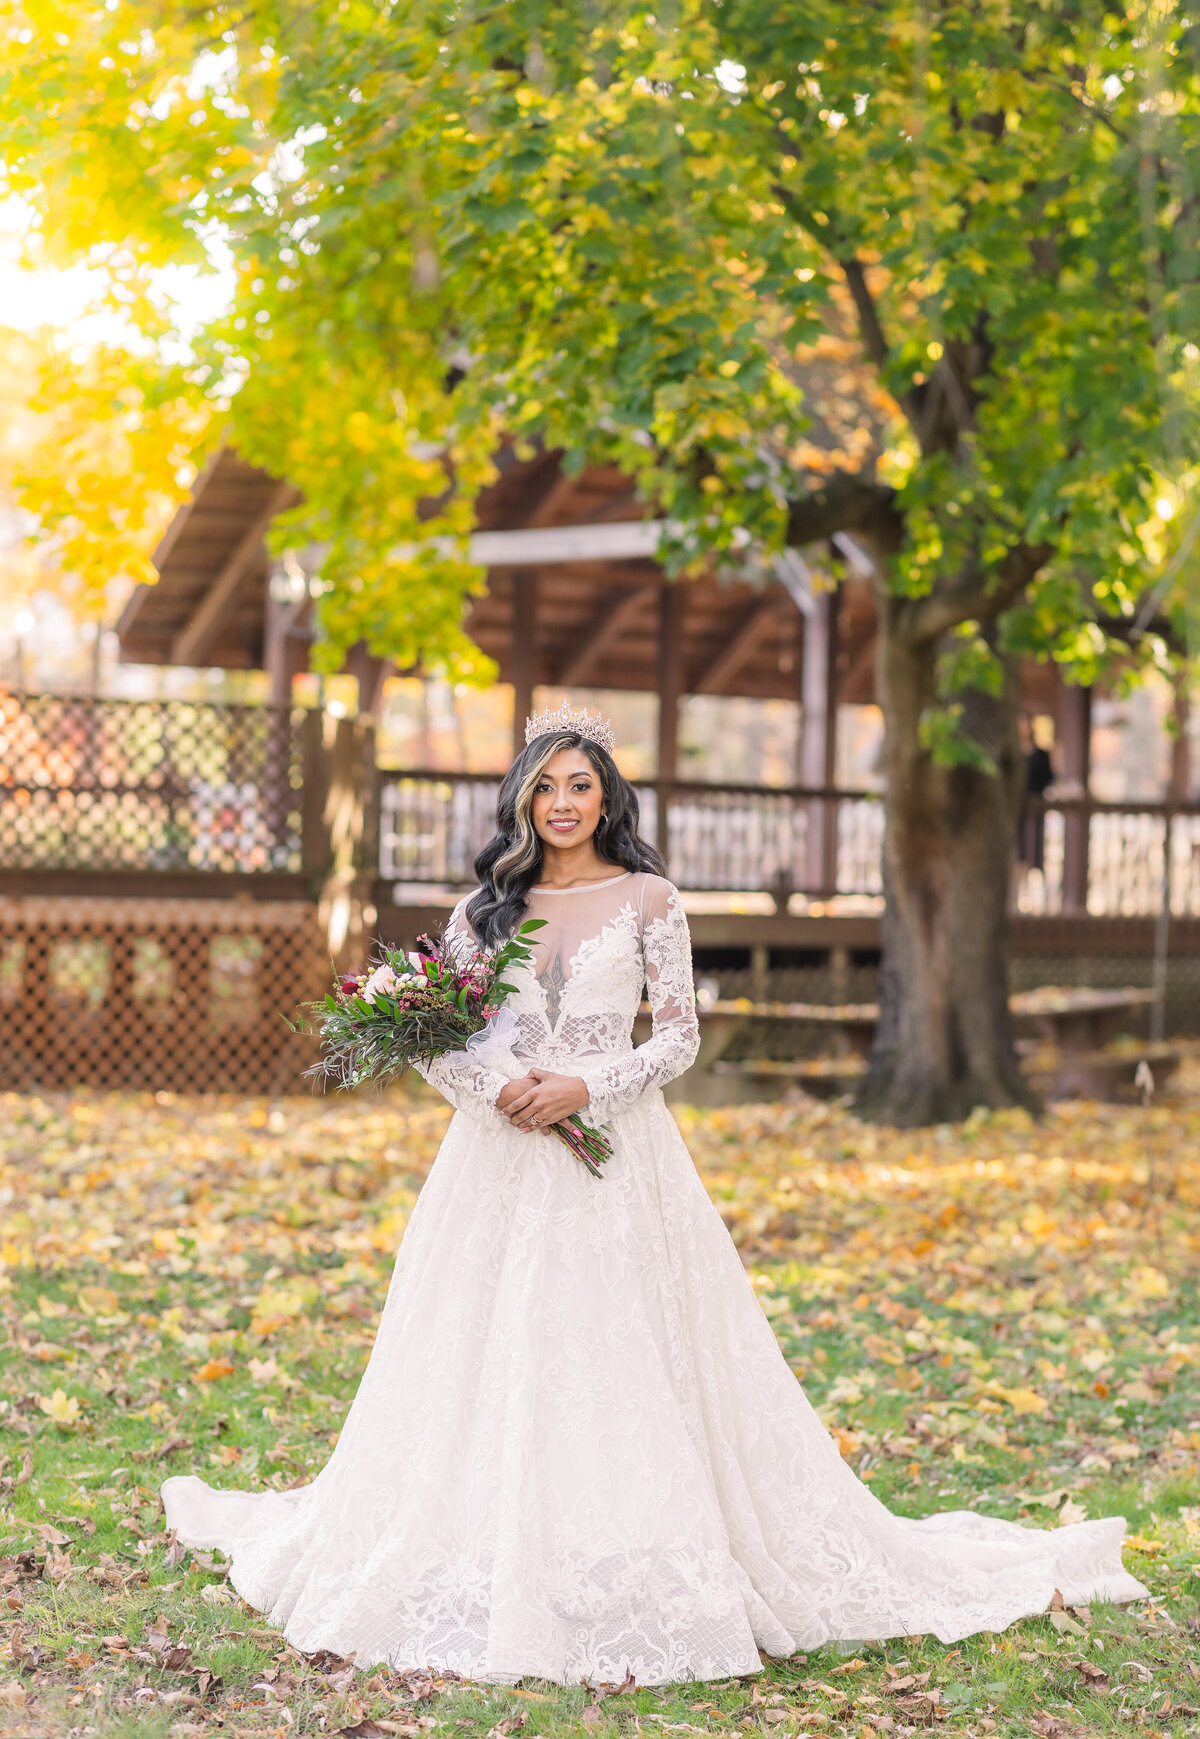 Hanover. PA Photography |  Bride on lawn